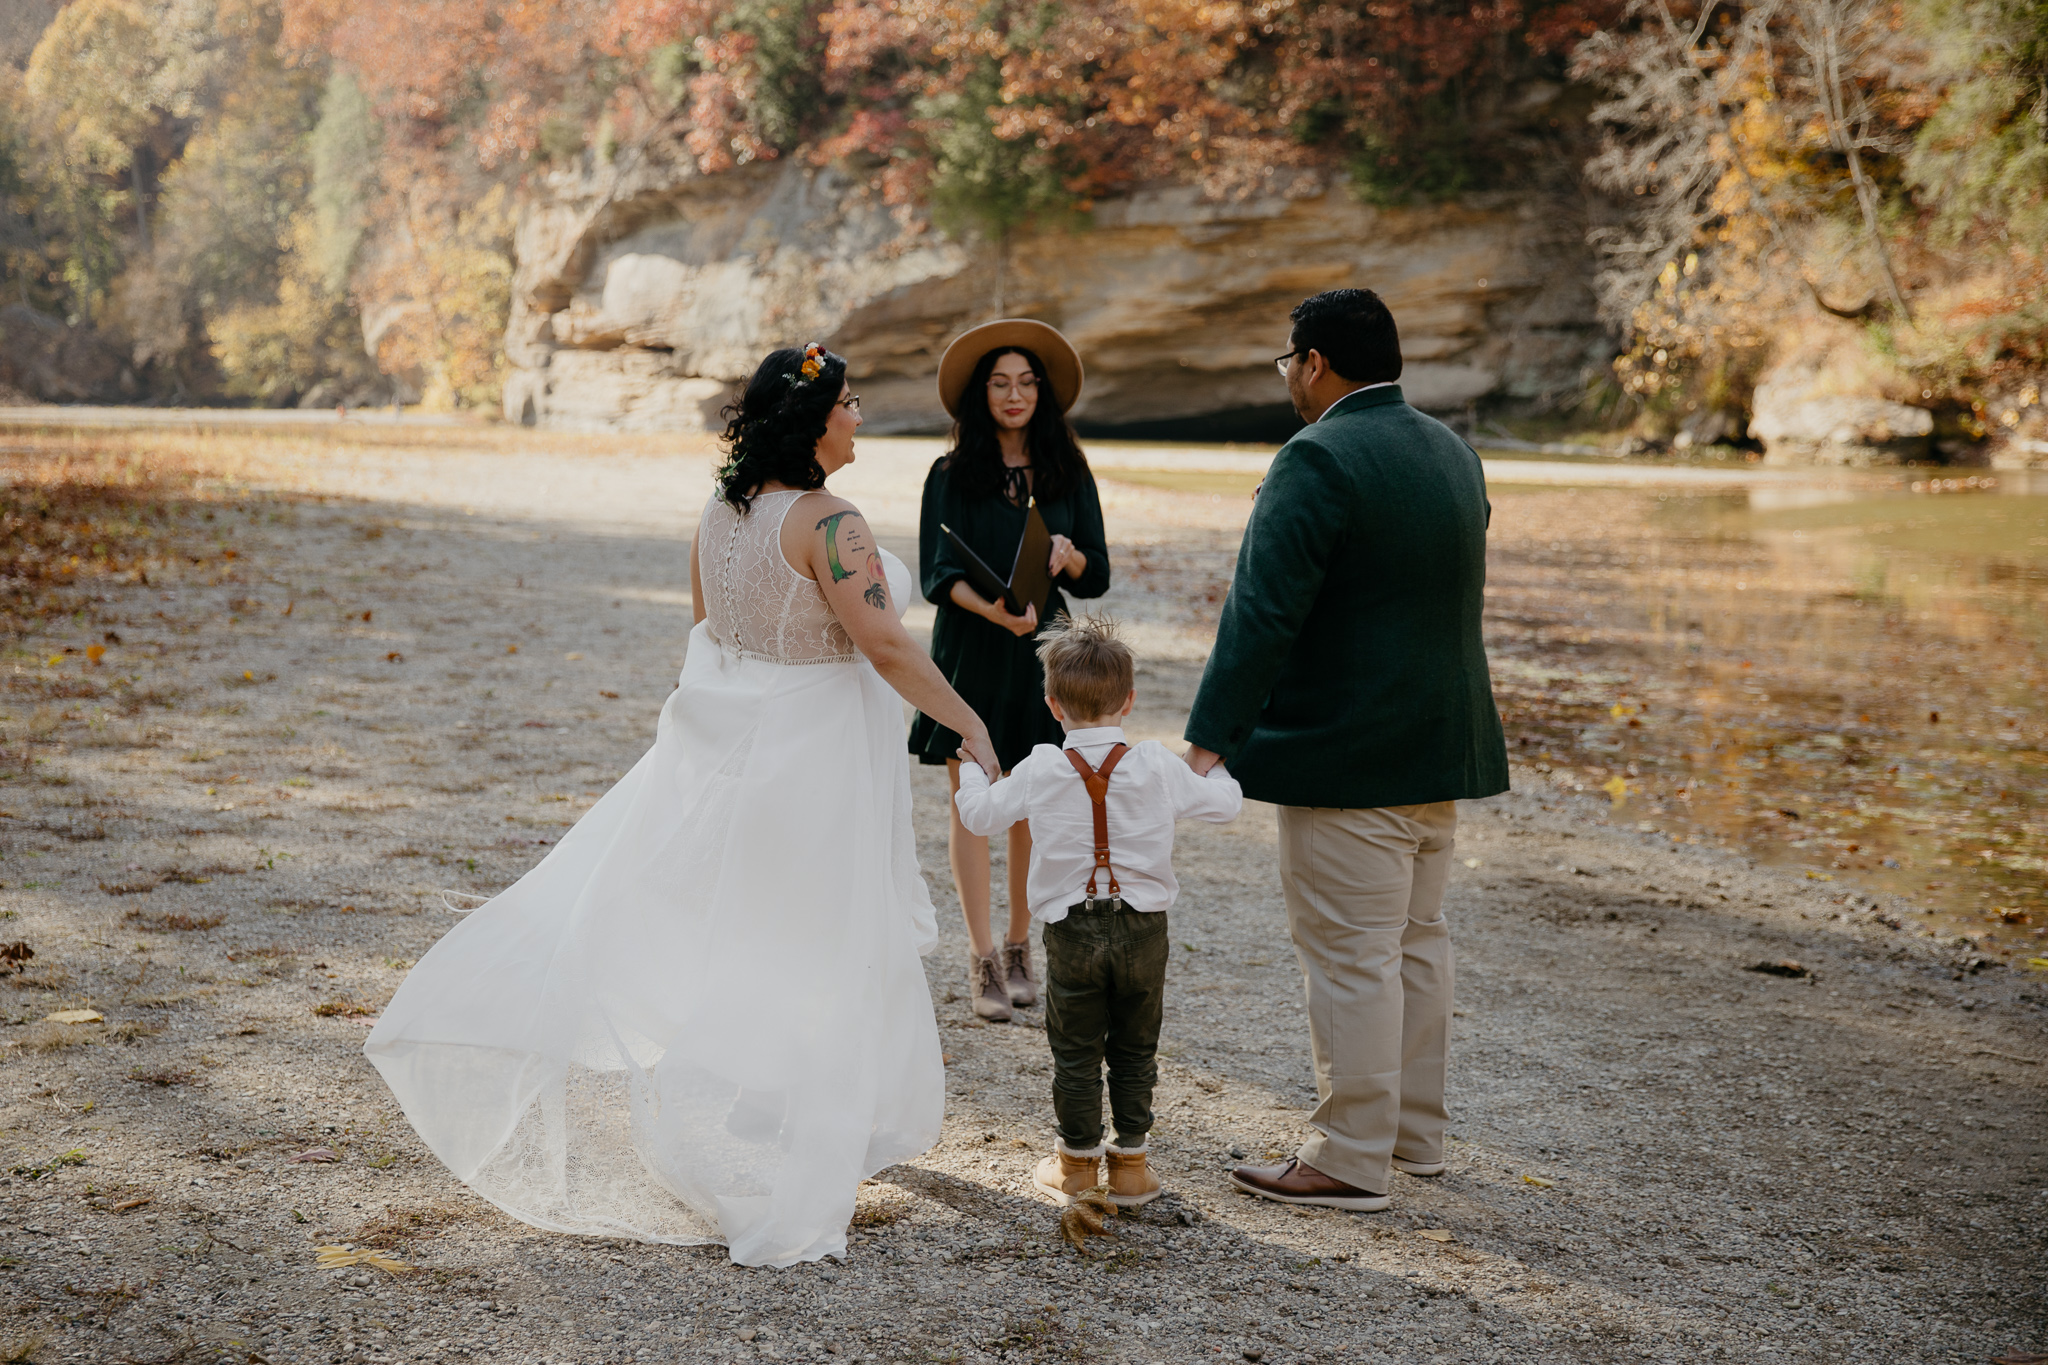 A couple eloping at Turkey Run Park in fall, exchanging vows at Sugar Creek.